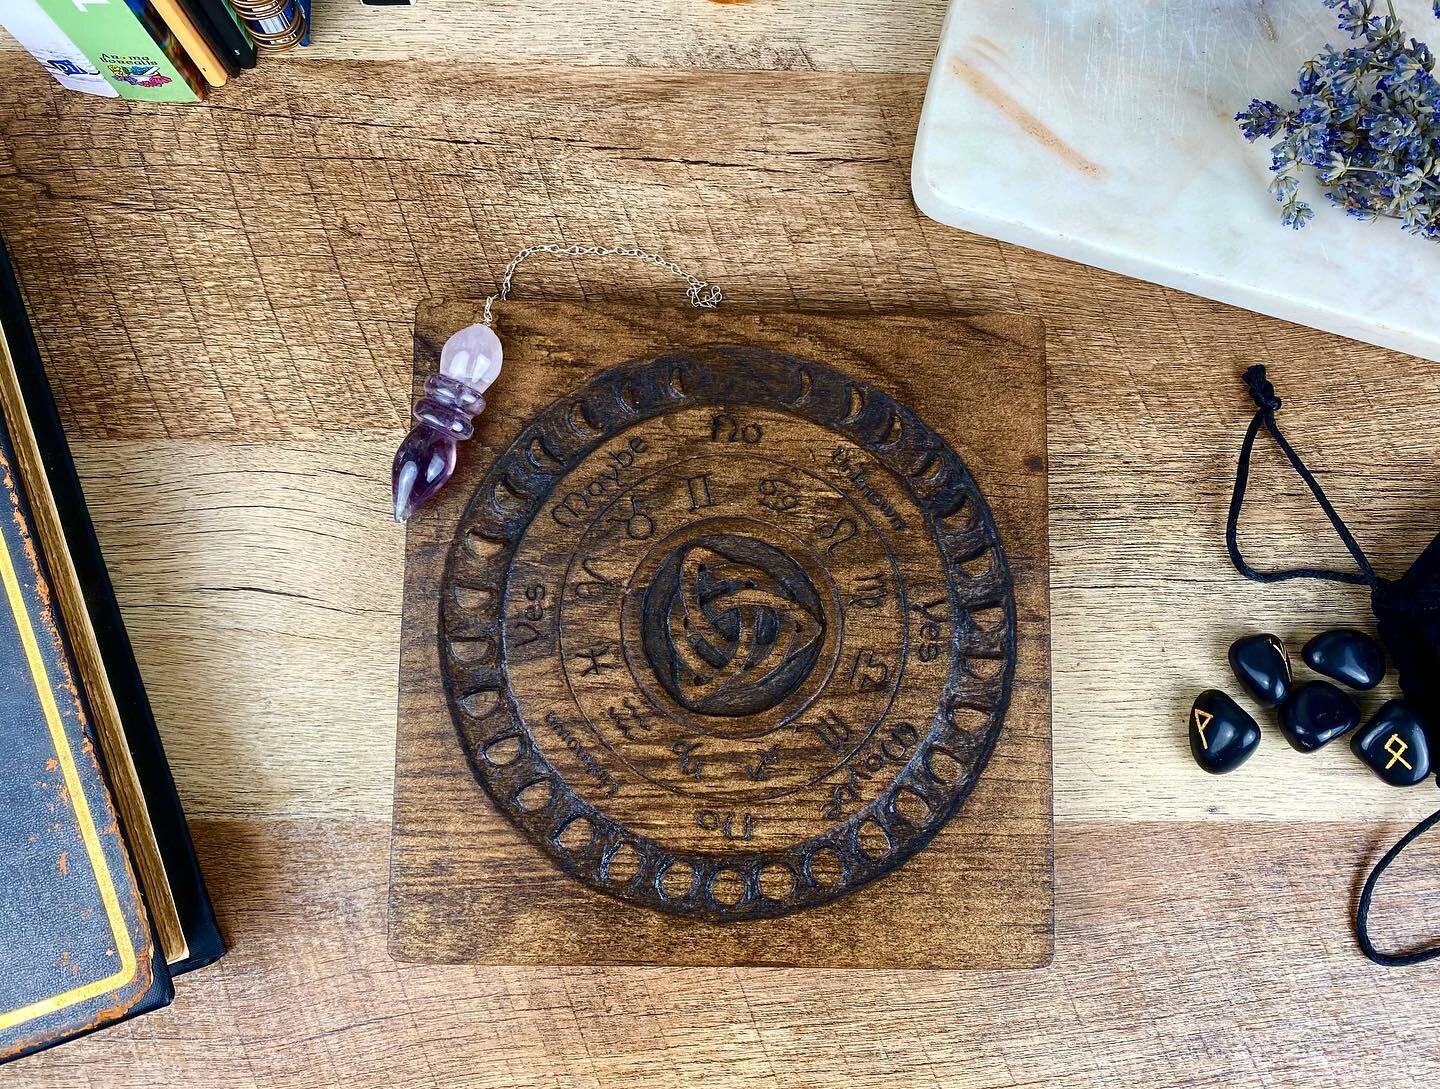 This beauty is complete. 🖤✨#oracle #tarot #pendulum #maple #handmade #occult #celtic #astrology #zodiac #fortune #future #divineguidance #divine #beautiful #amethyst #lavender #witchesofinstagram #witchcraft #witch #magic